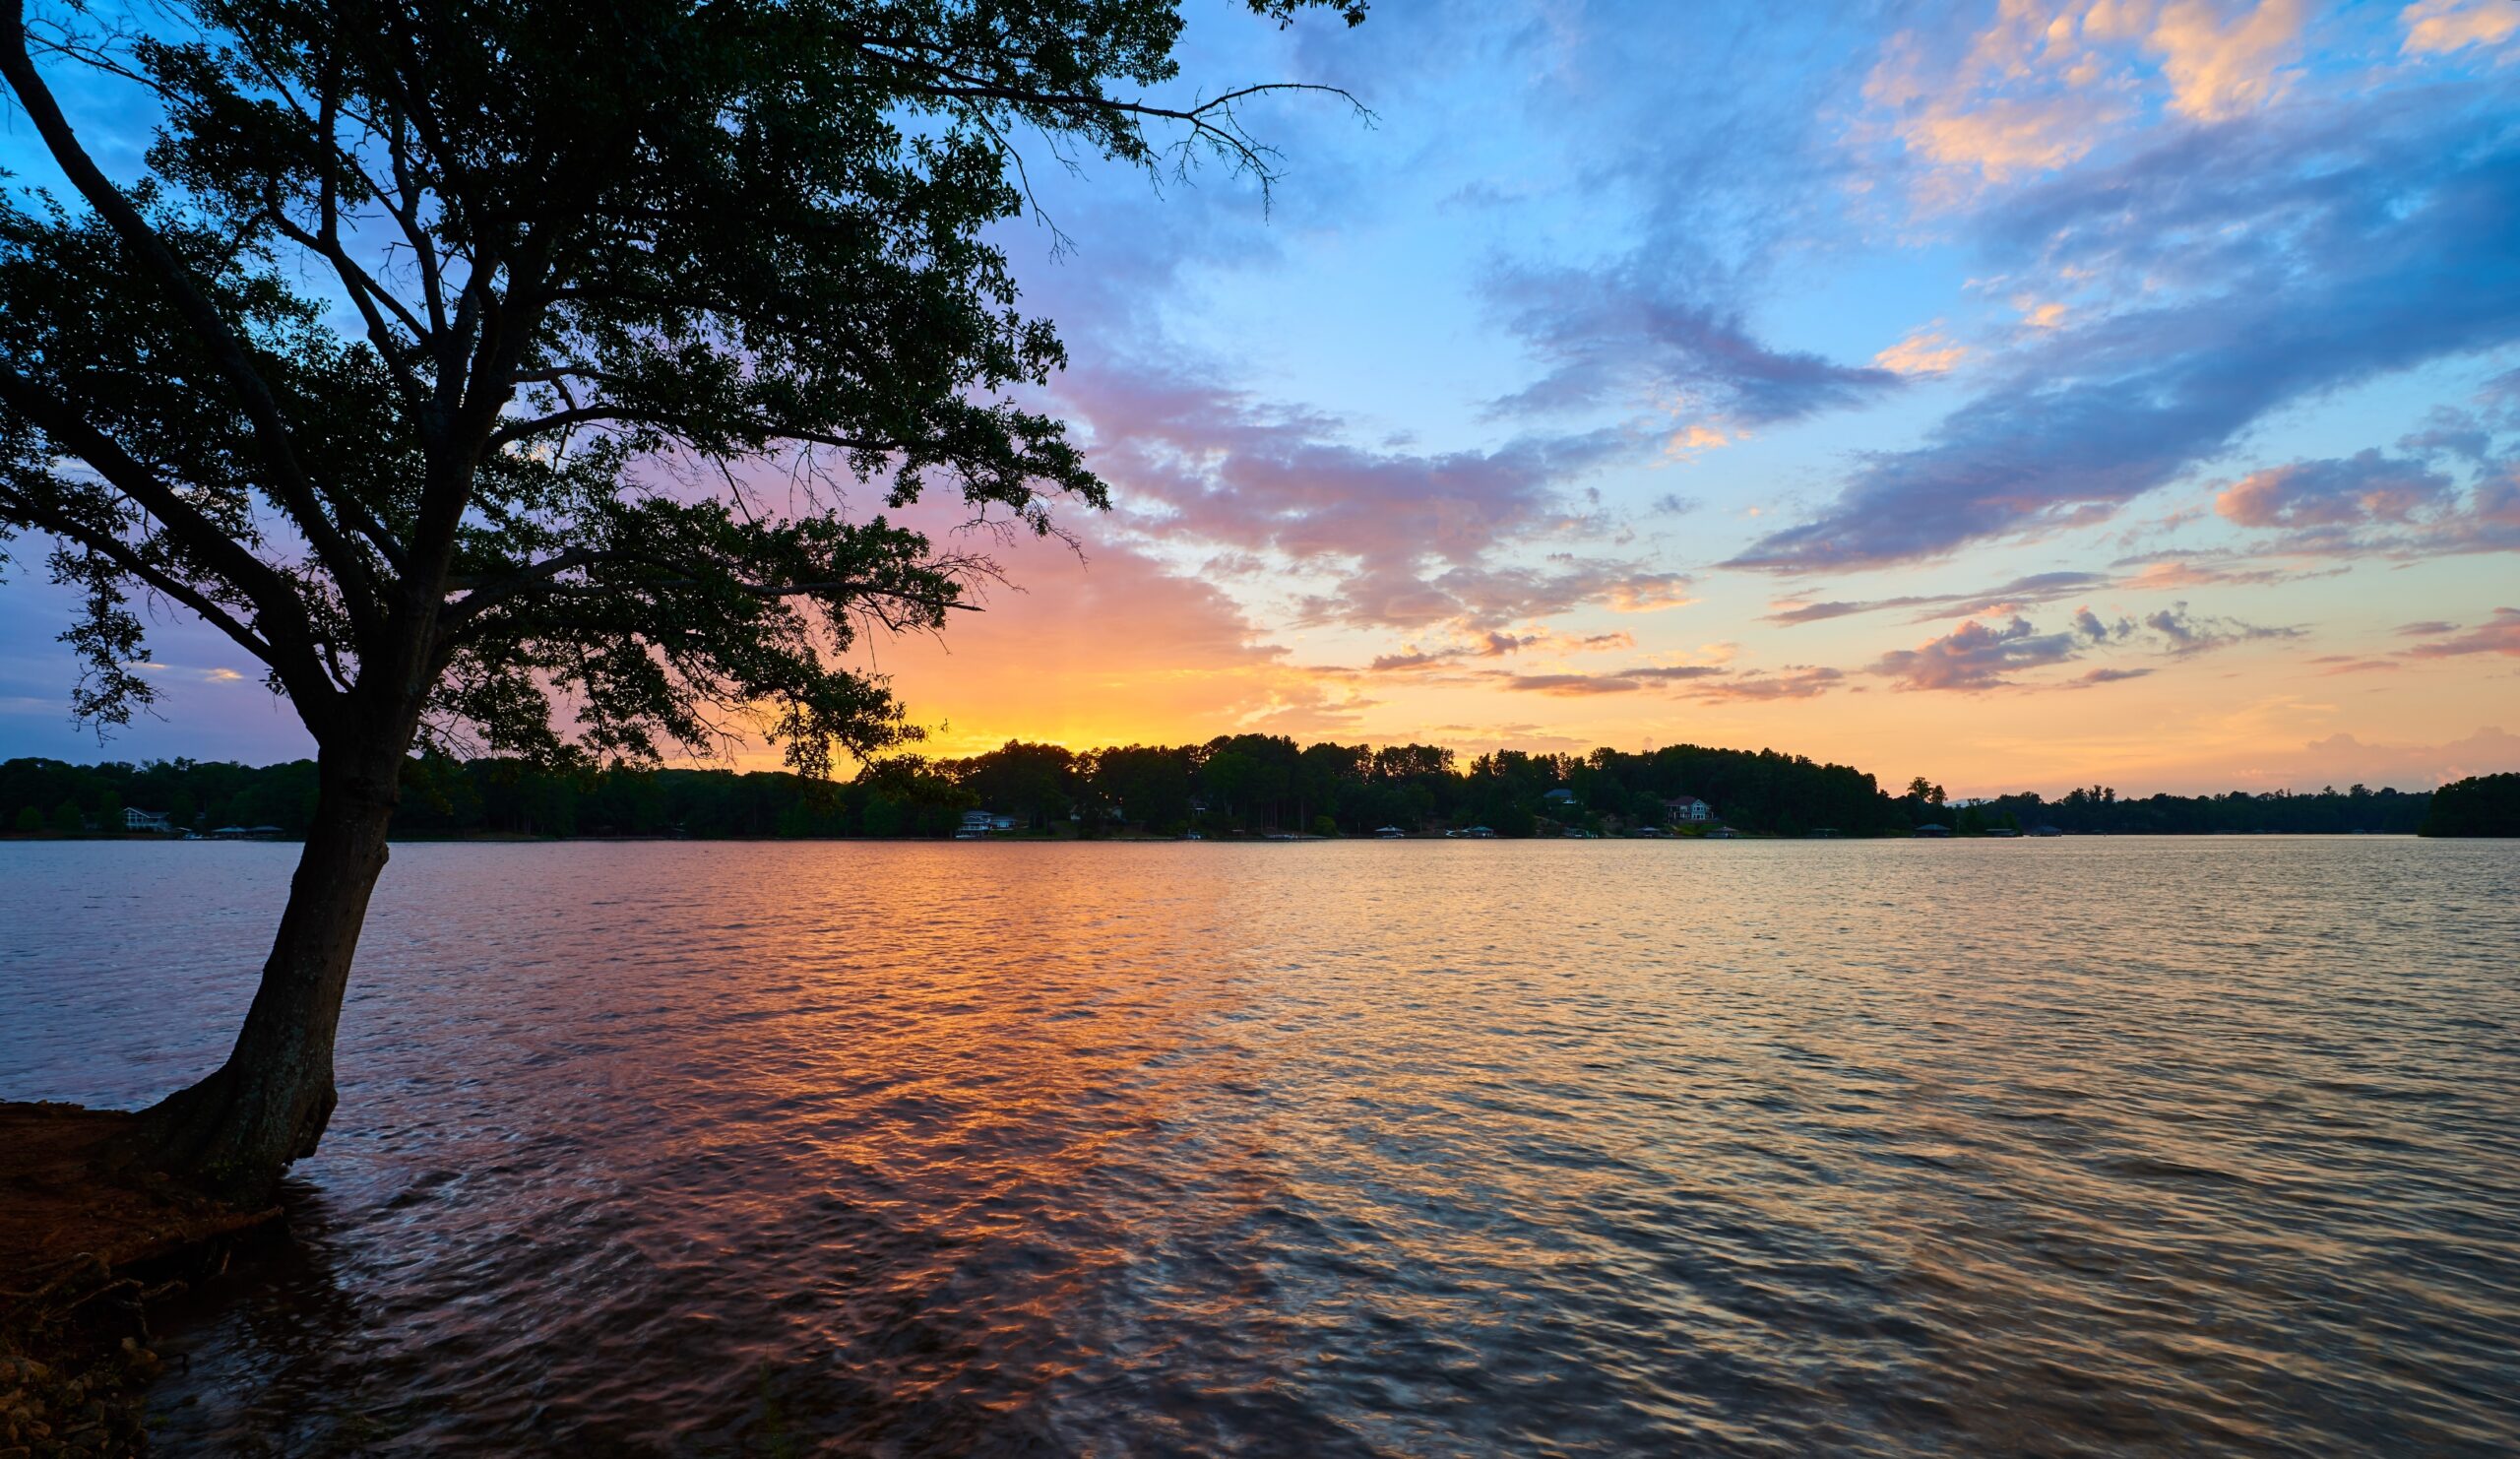 A lake at dusk with the colors of the setting sun reflected onto it.